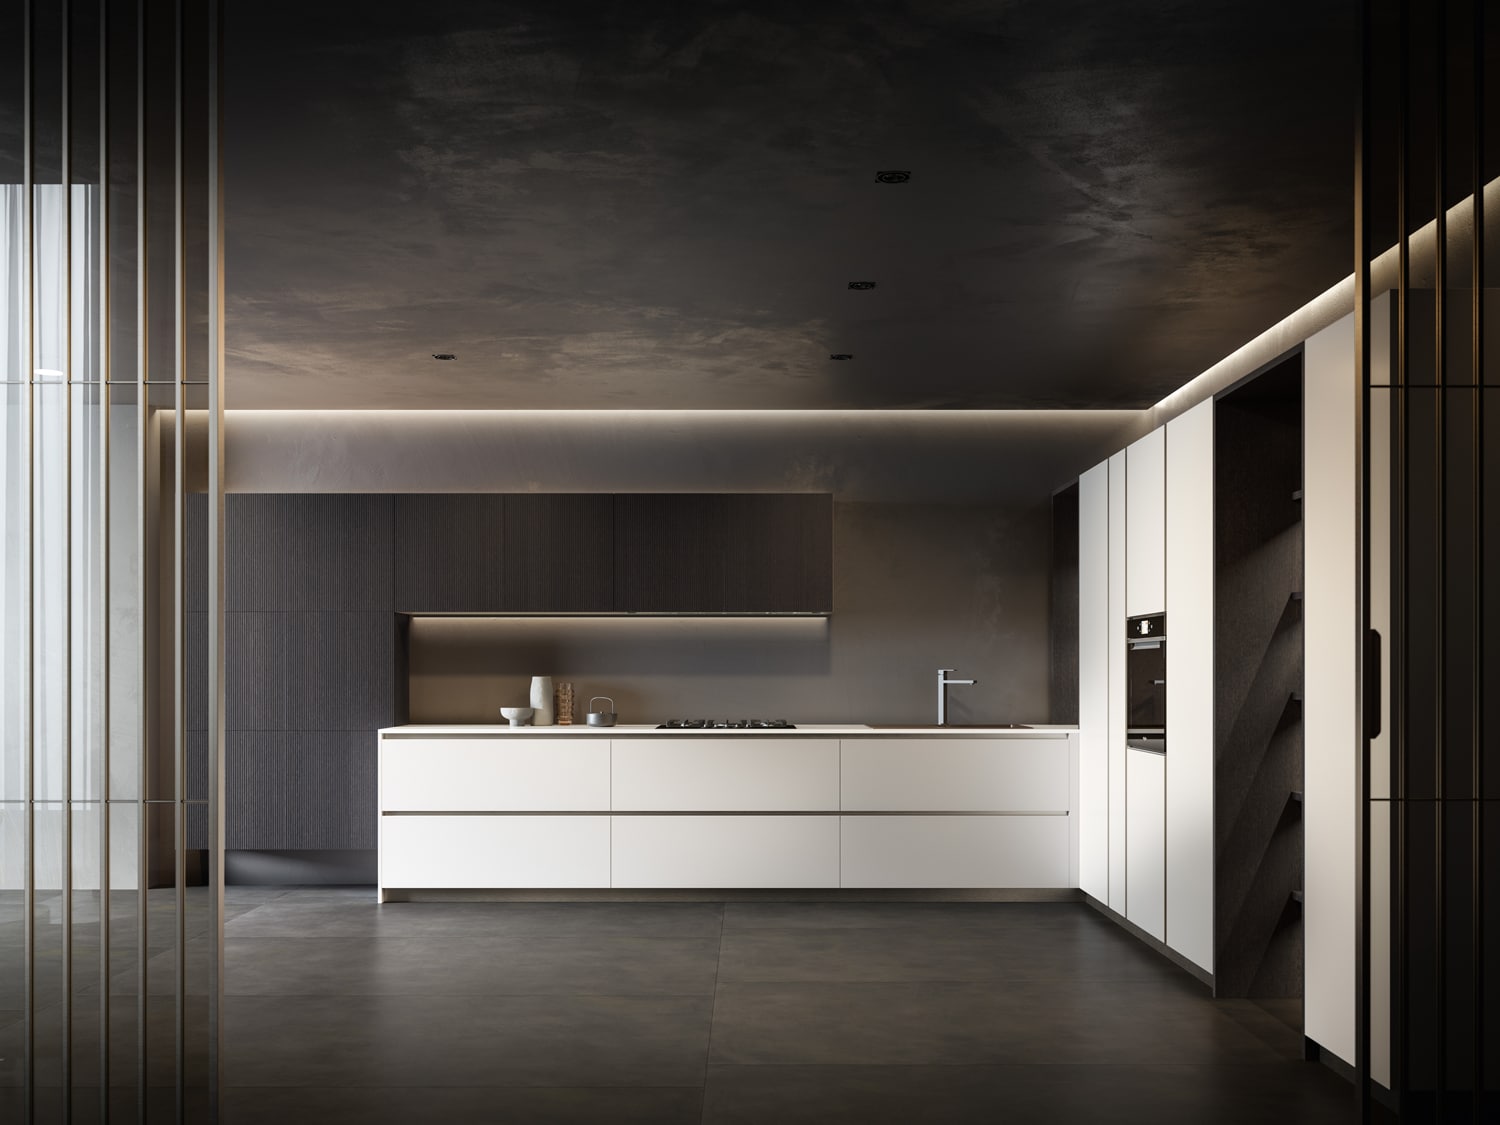 Contemporary and essential in its design, this kitchen features base cabinets and tall units in Neve matte lacquer, channels in Titanium, and wall units with Riga doors in ribbed Station oak wood.  